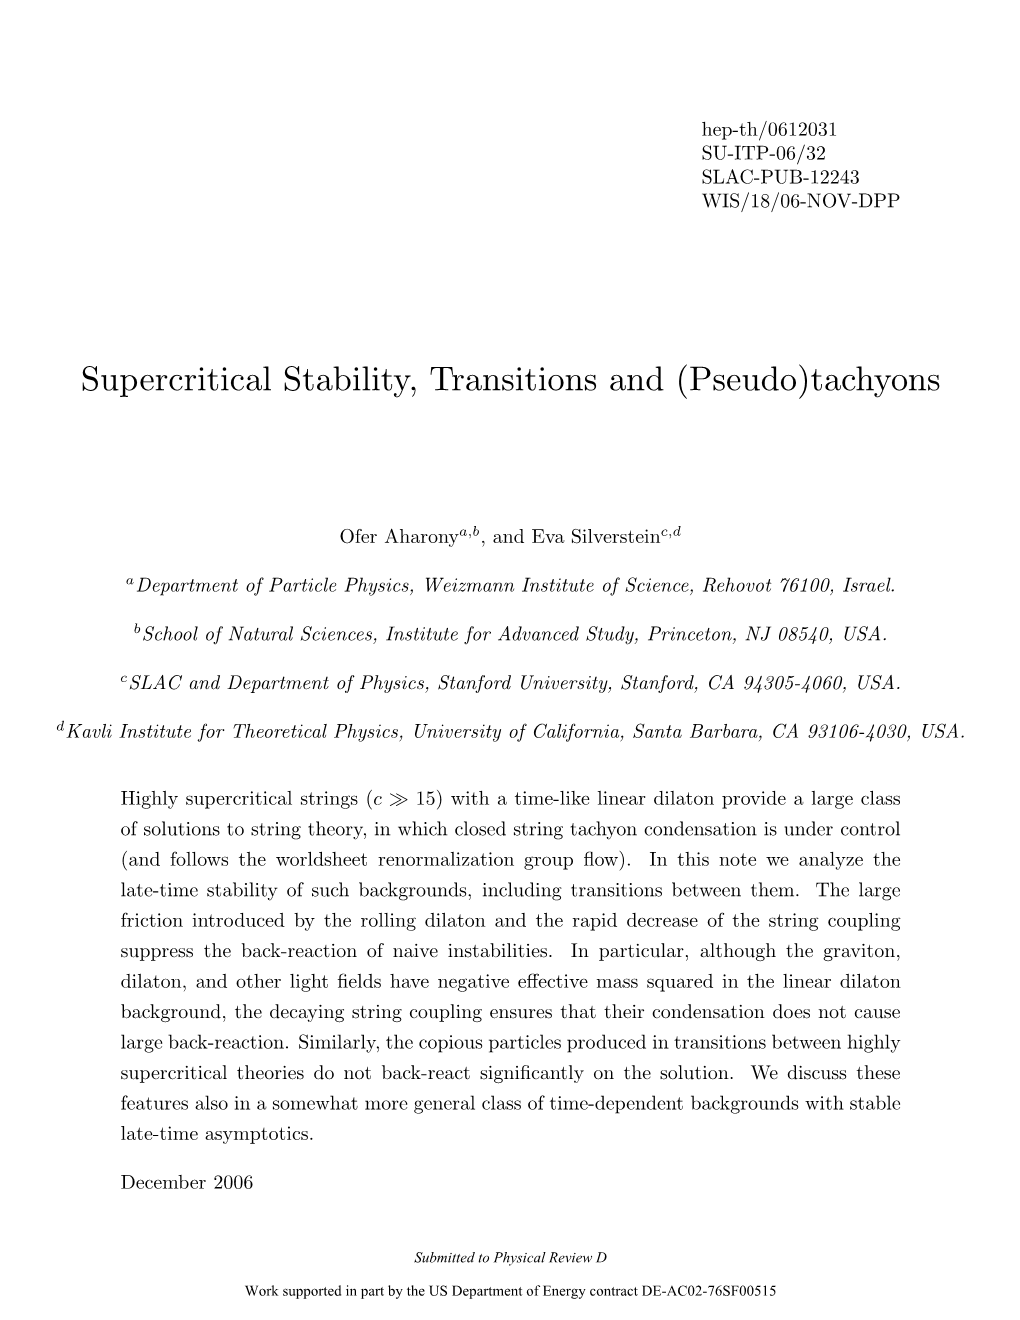 Supercritical Stability, Transitions and (Pseudo)Tachyons